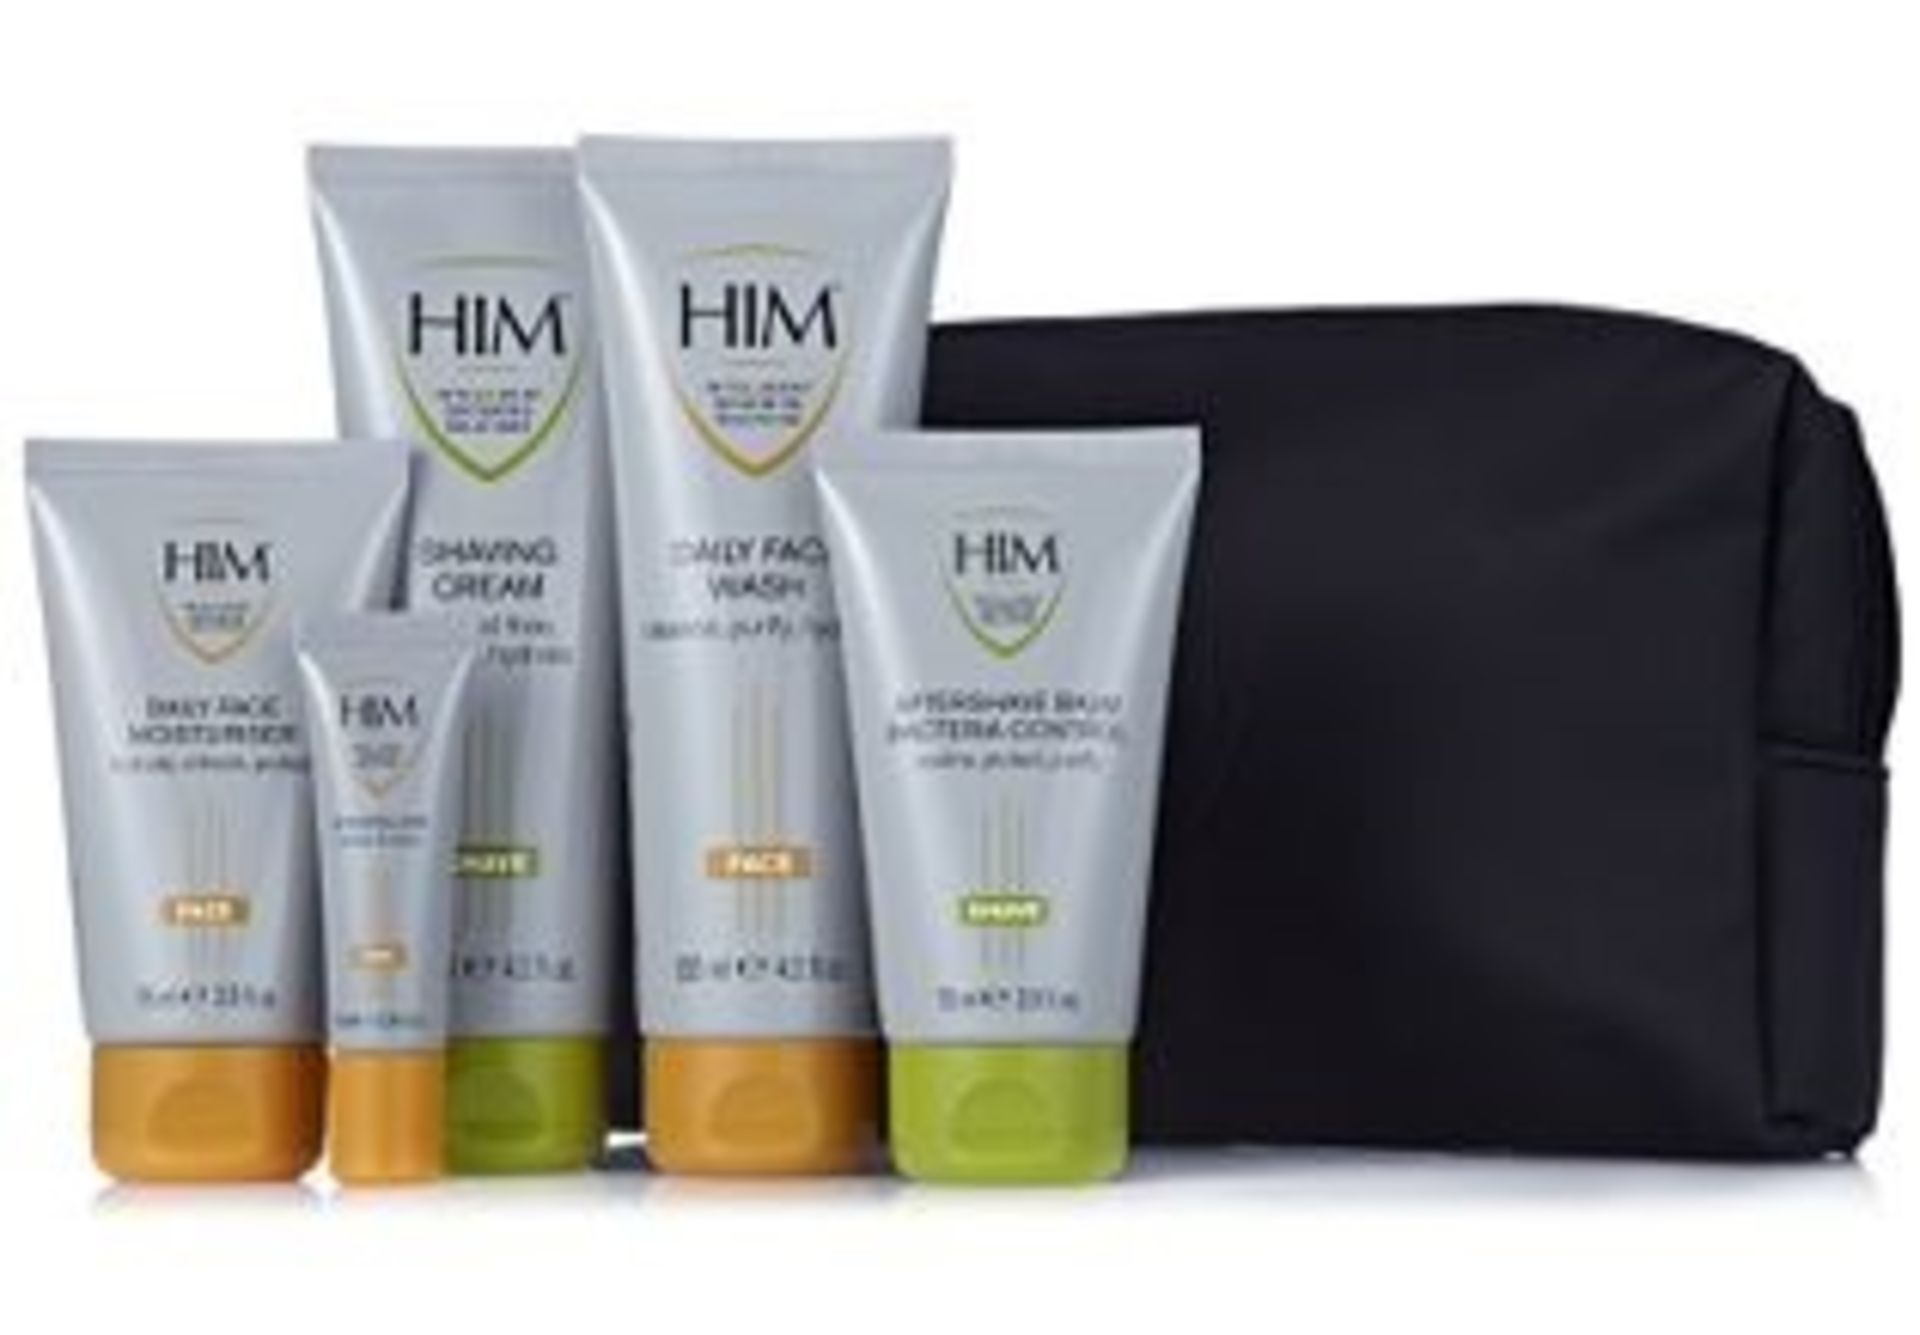 5 x HIM Intelligent Grooming Solutions 5 Piece Face & Shave Essentials Packs with Toiletry Bags - - Image 2 of 13